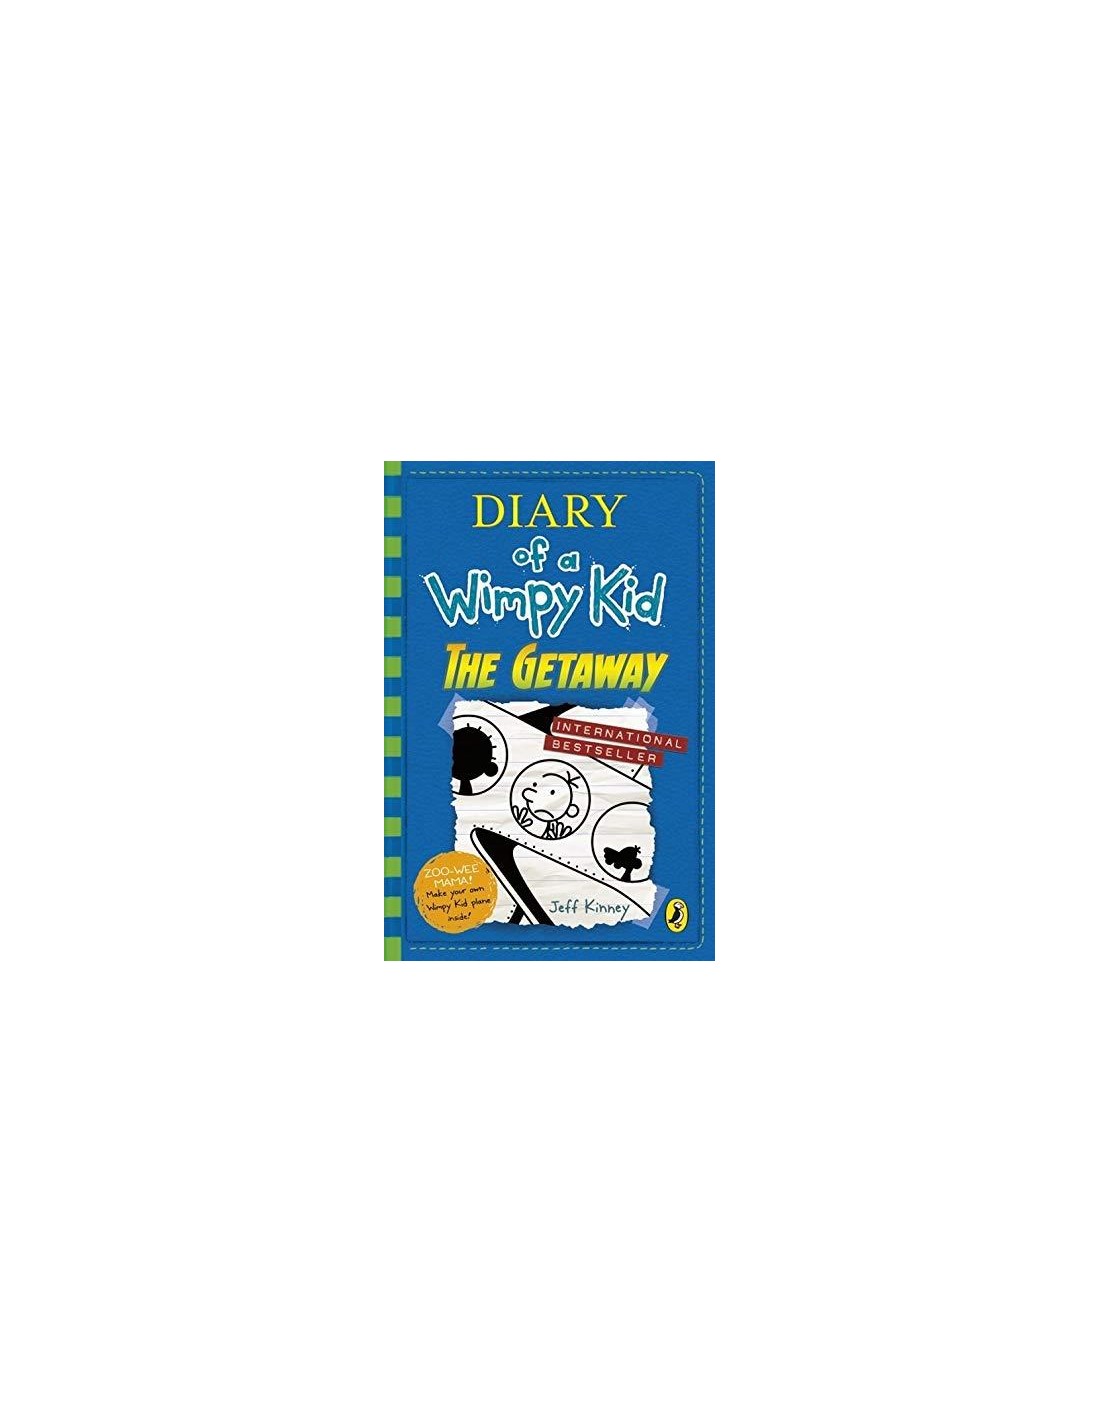 Diary　Of　Getaway,　LTD　A　Wimpy　Kid　The　Book　12-Adrion